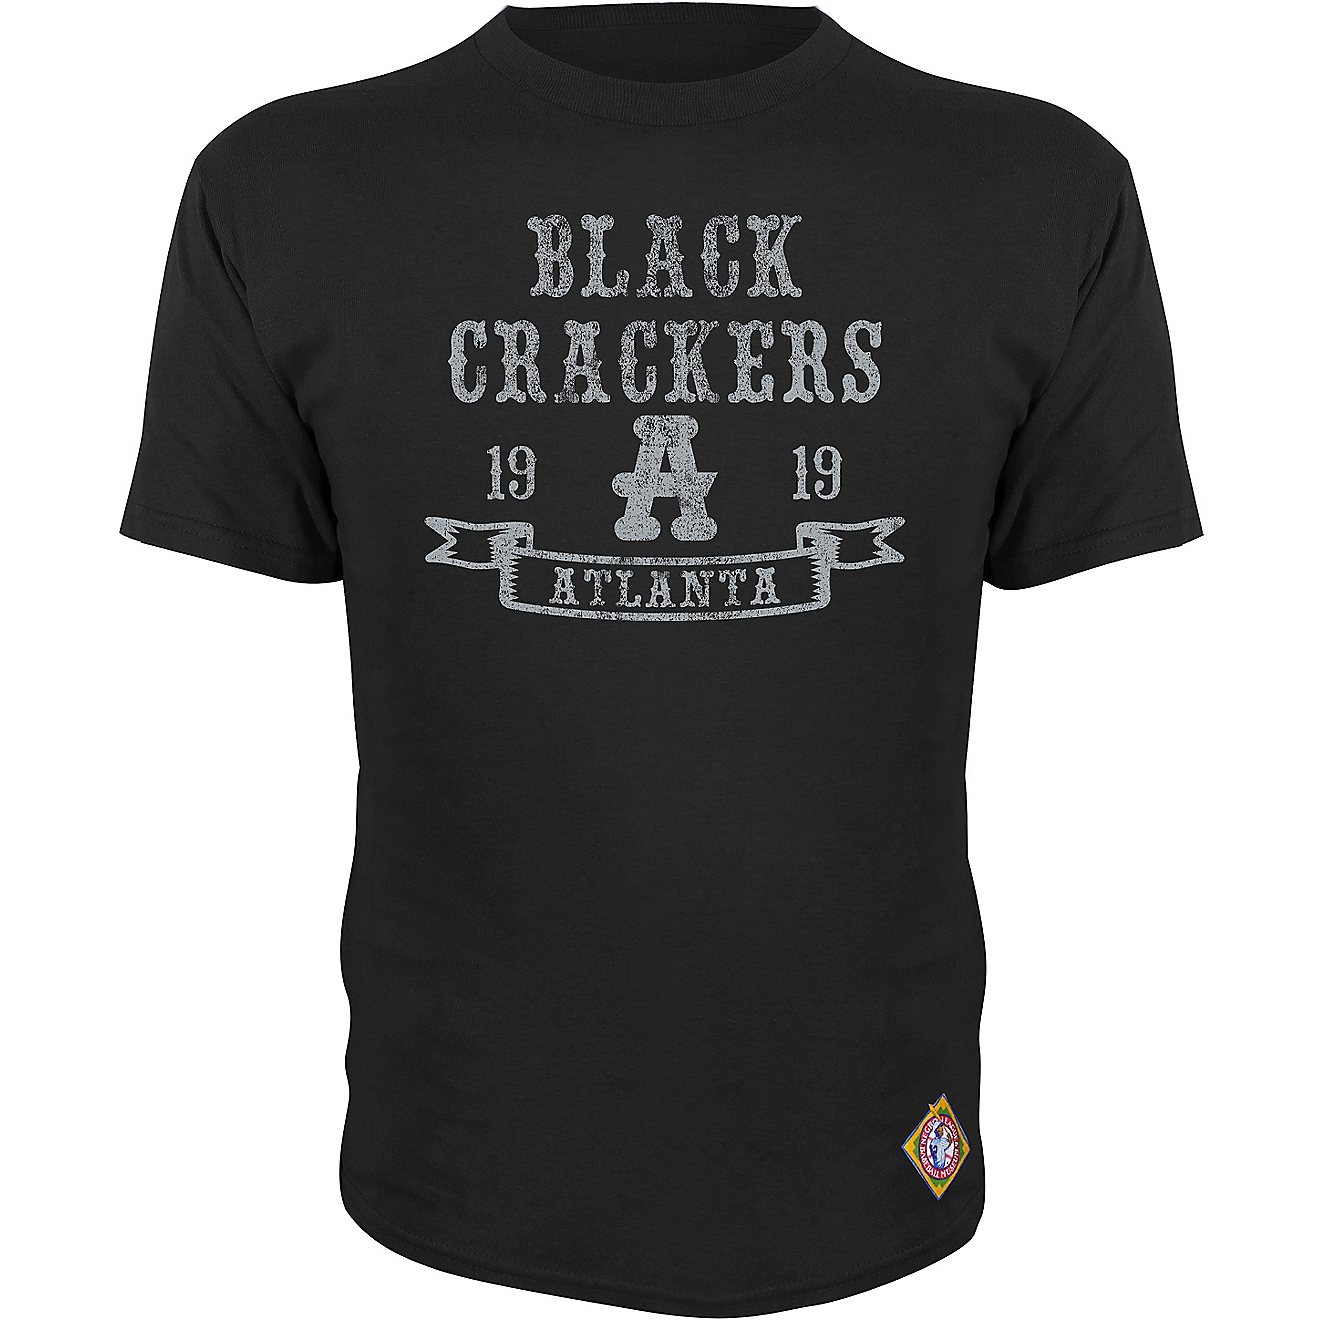 Stitches Men's Black Crackers Team Graphic Short Sleeve T-shirt                                                                  - view number 1